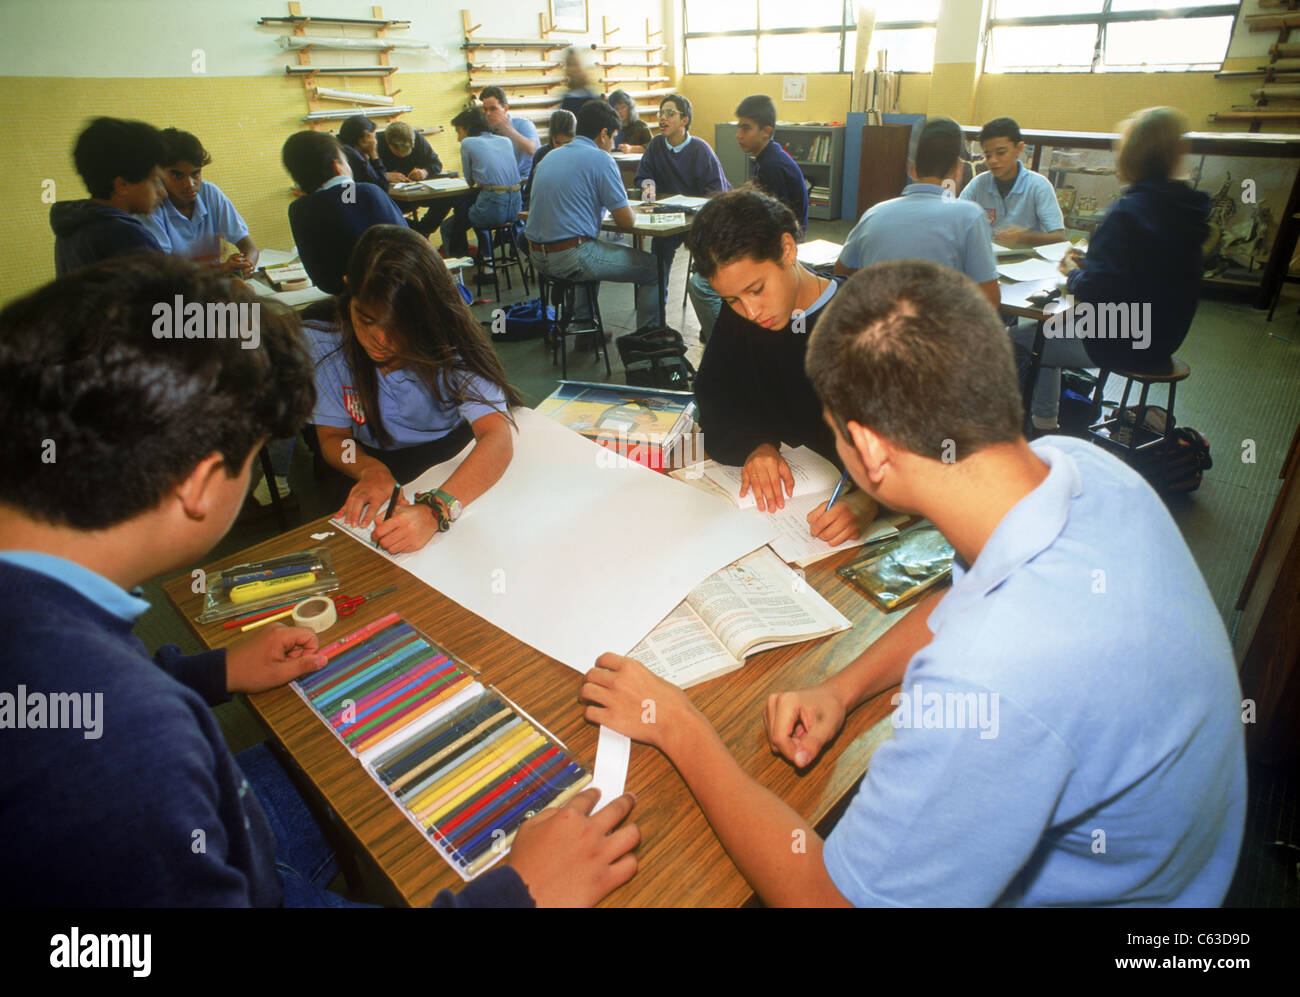 Study group with art materials at desk in elementary school classroom with teacher and students in Caracas, Venezuela Stock Photo